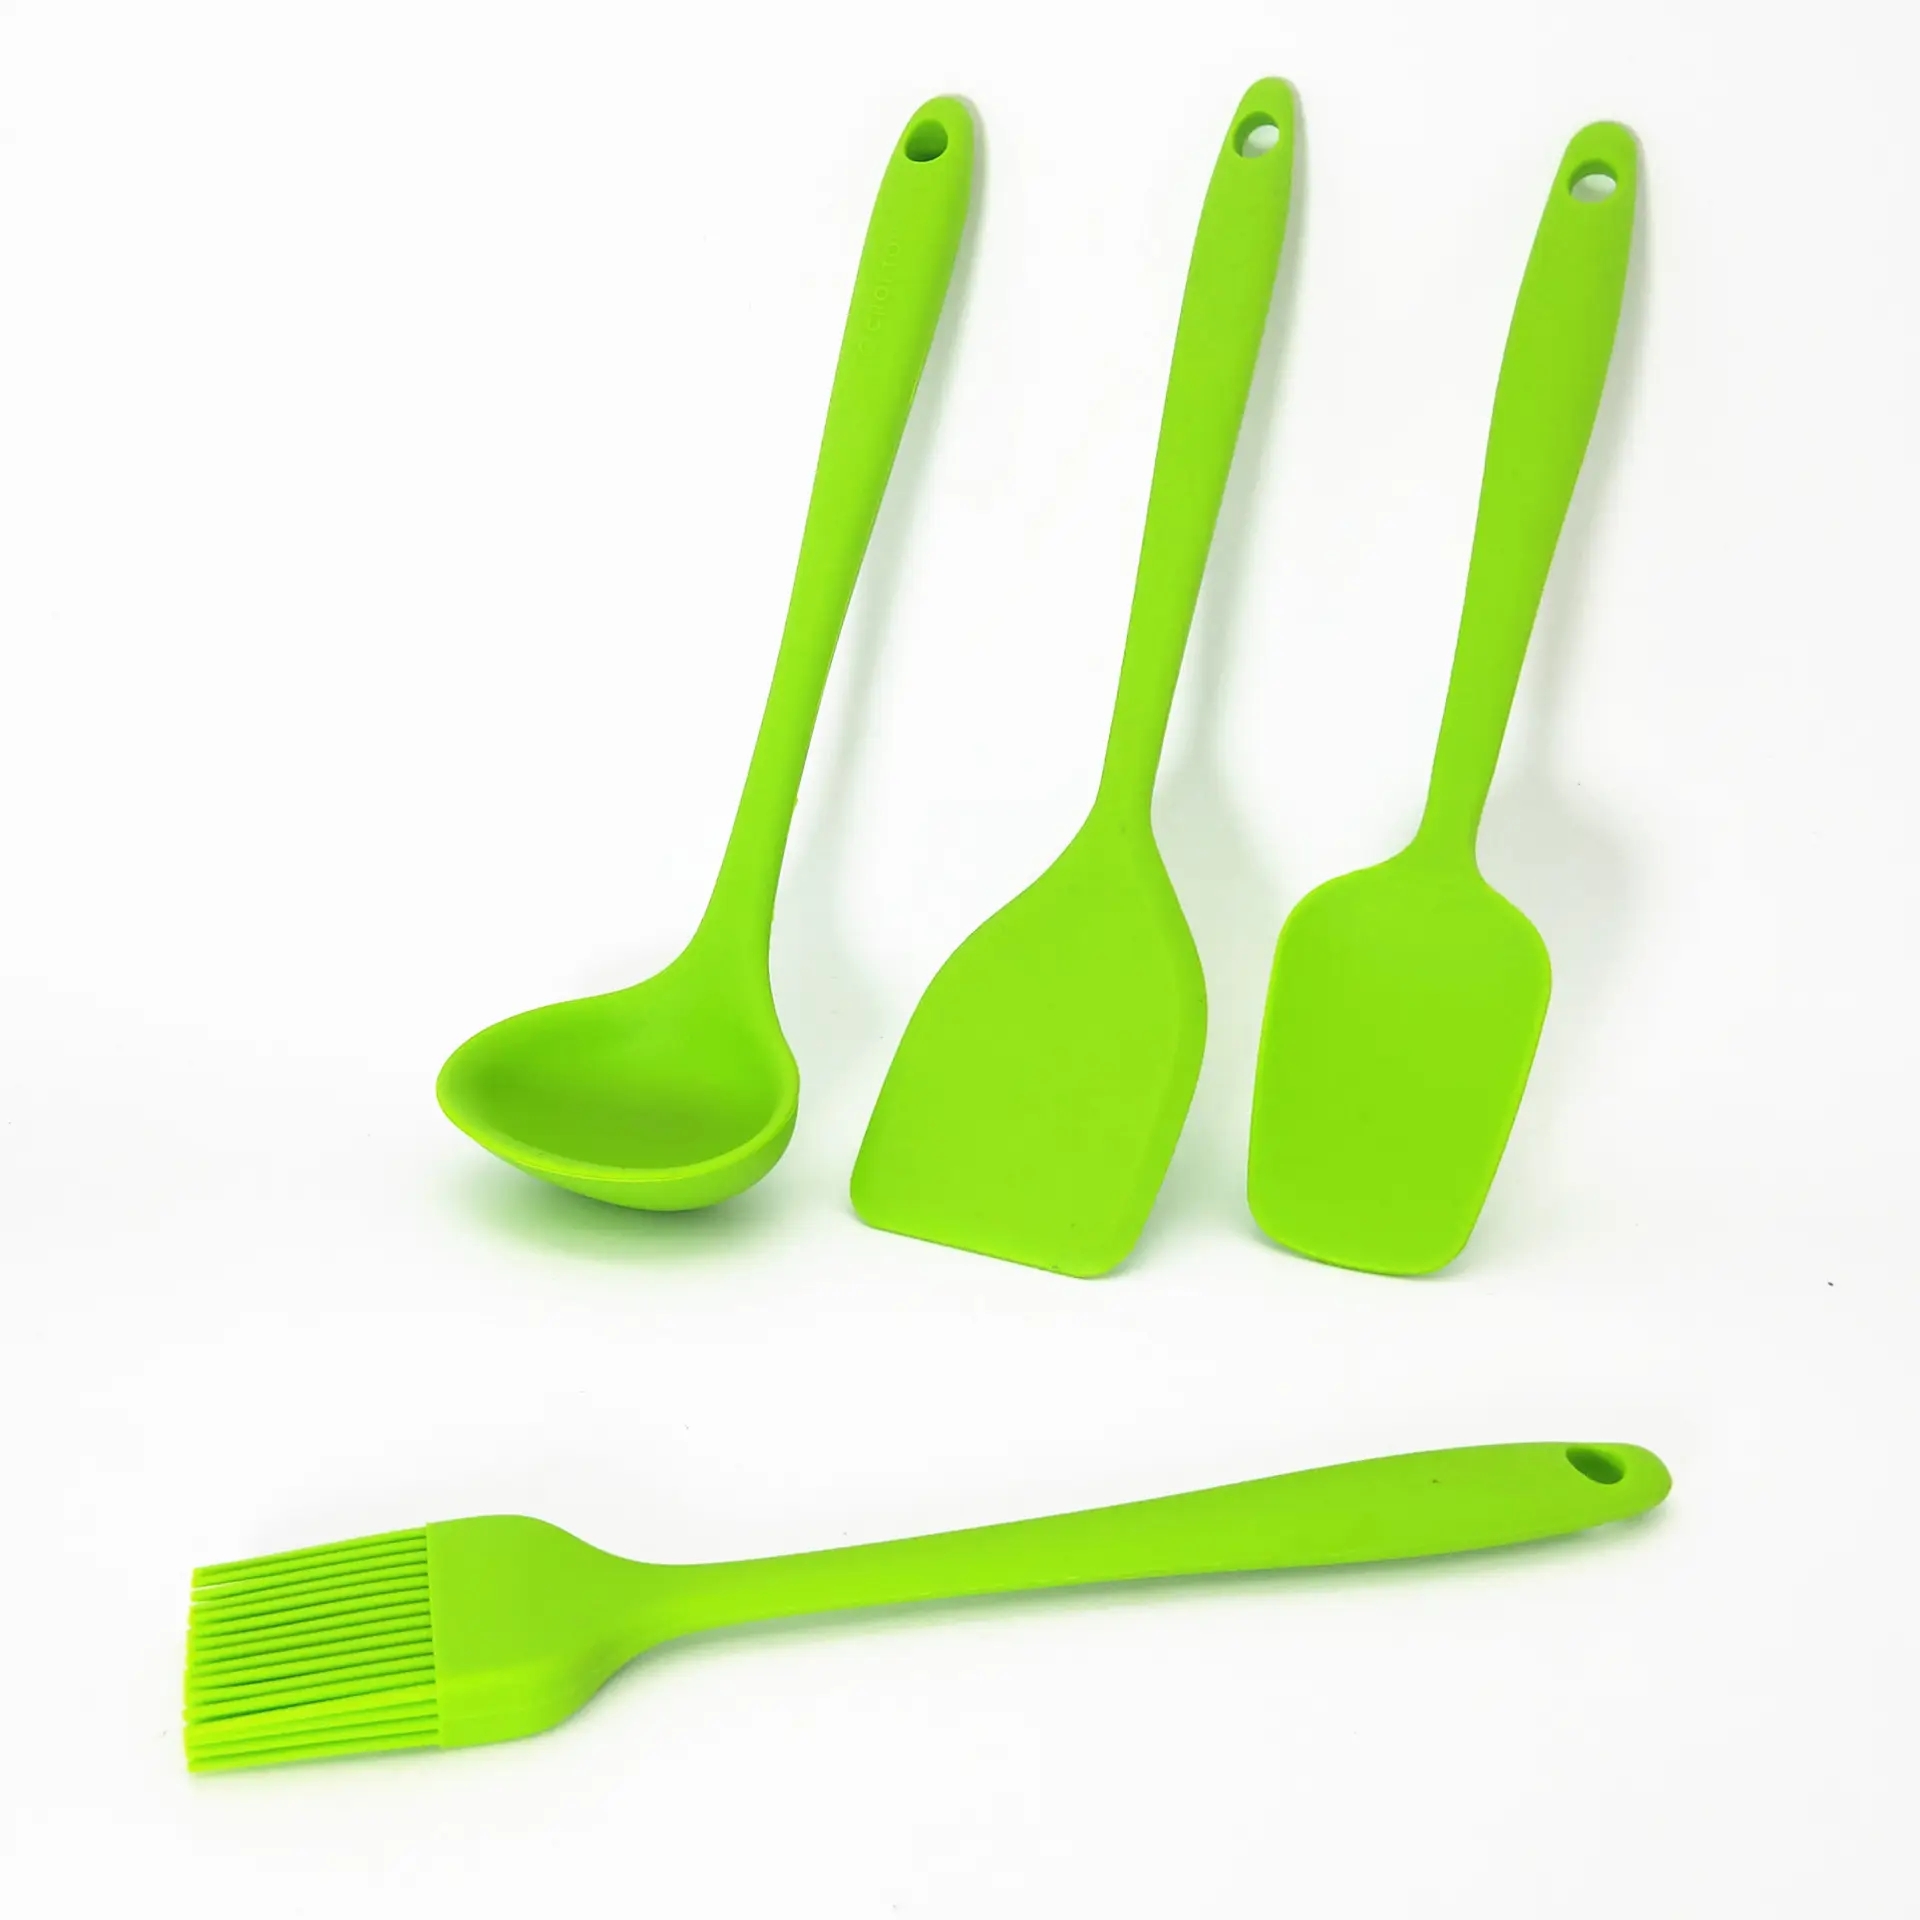 Is silicone kitchen utensils toxic to heat